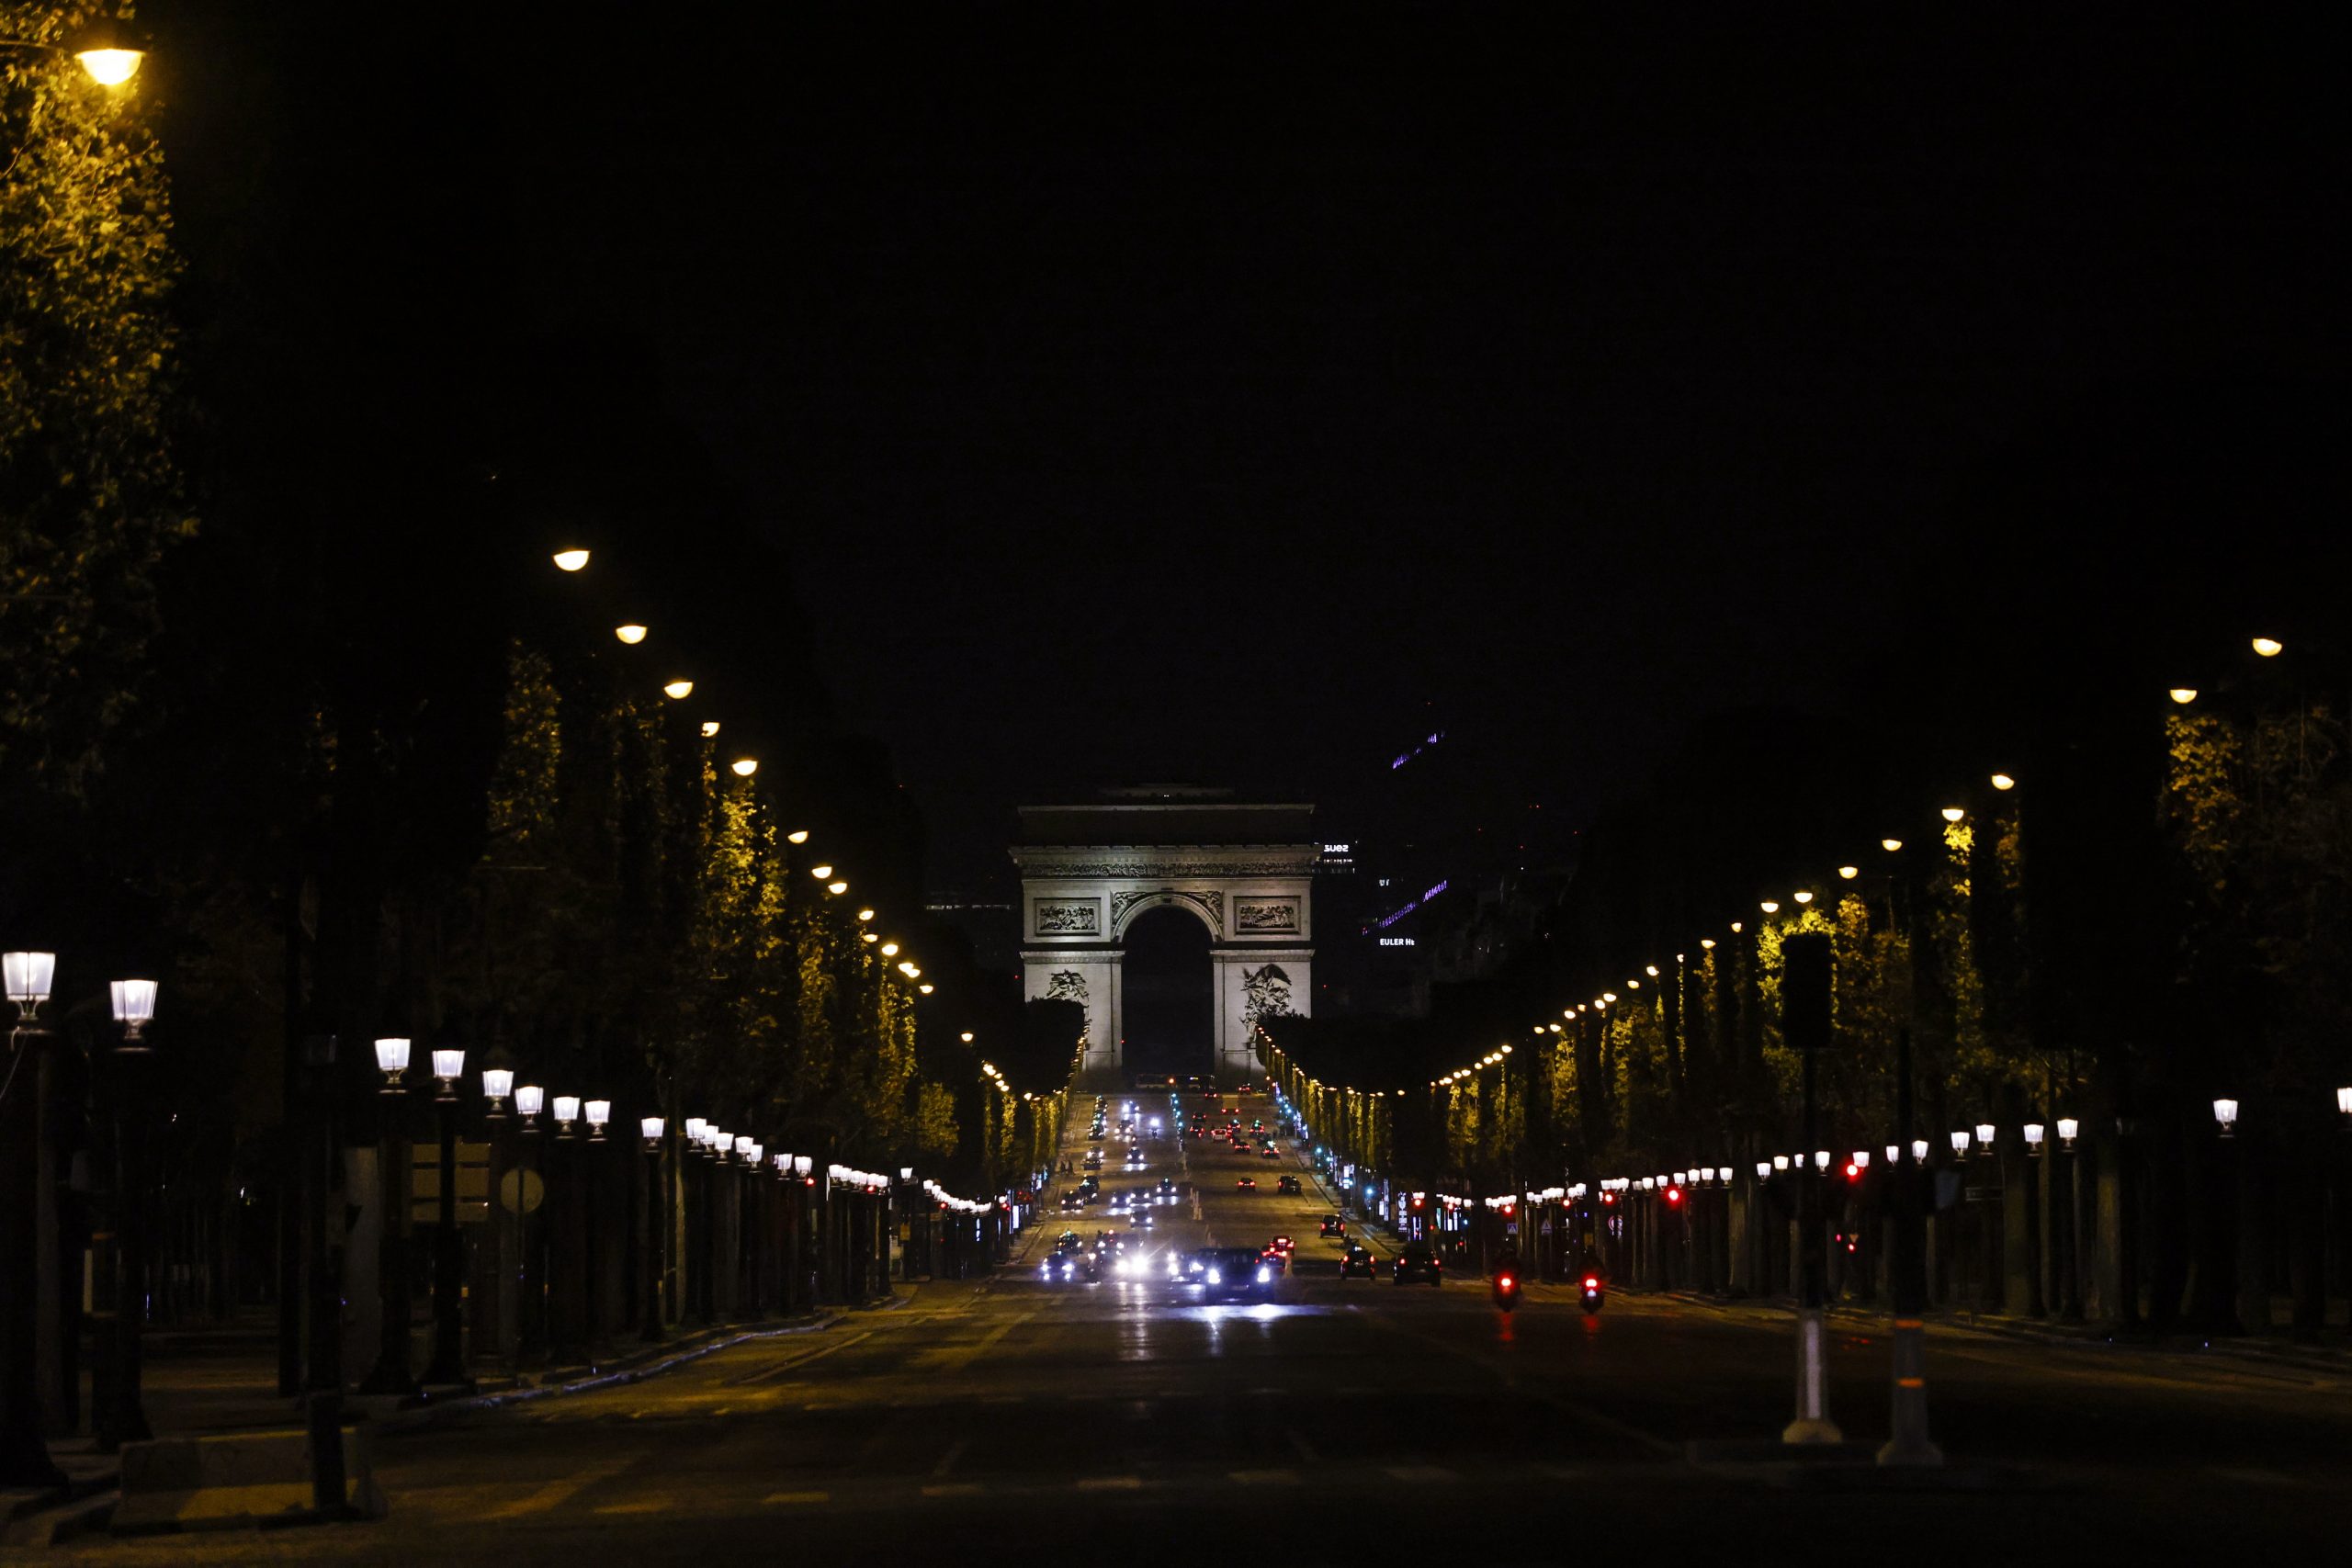 epa08754323 Few cars ride on the Champs Elysees avenue during a city-wide night time curfew goes into effect in Paris, France, 17 October 2020. French President Emmanuel Macron announced on 14 October that a curfew would be established for a minimum duration of four weeks in Paris and eight other cities across France to reduce the spread of COVID-19 after a surge in cases of coronavirus across the country. The curfew prohibits leaving one's house between 9pm and 6am unless a valid motive is presented.  EPA/YOAN VALAT